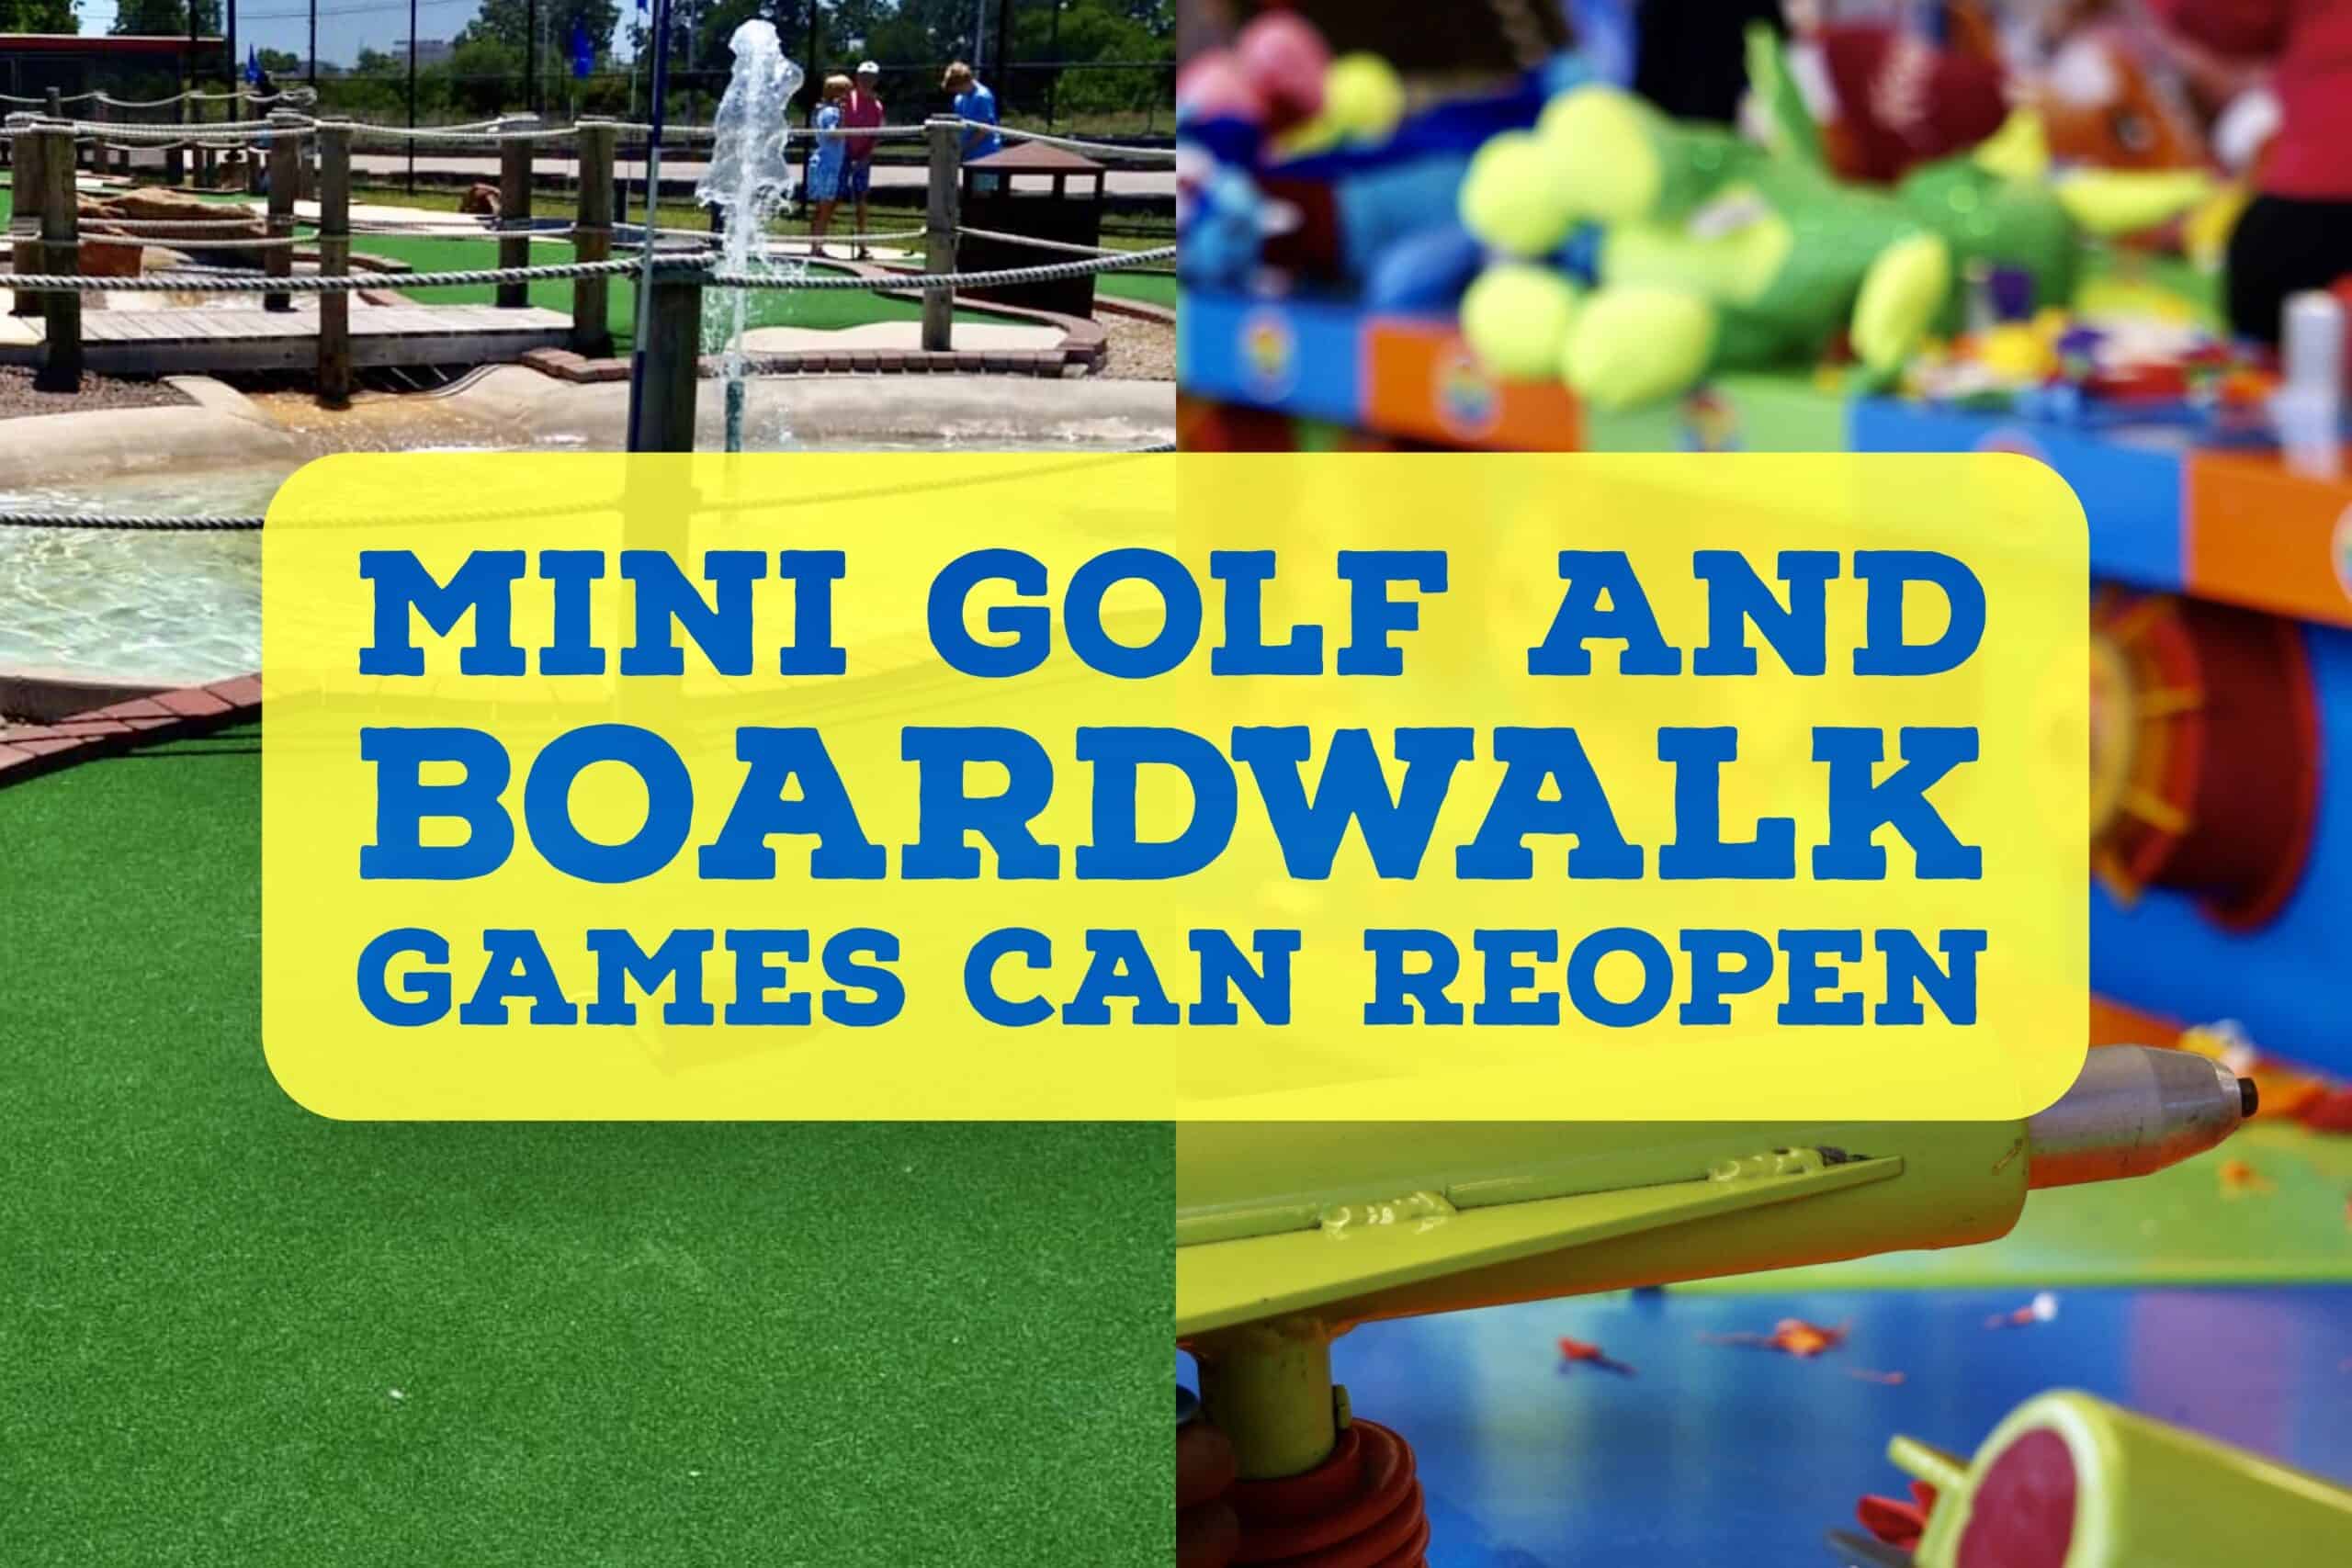 NJ Mini-Golf and Boardwalk Games Can Reopen